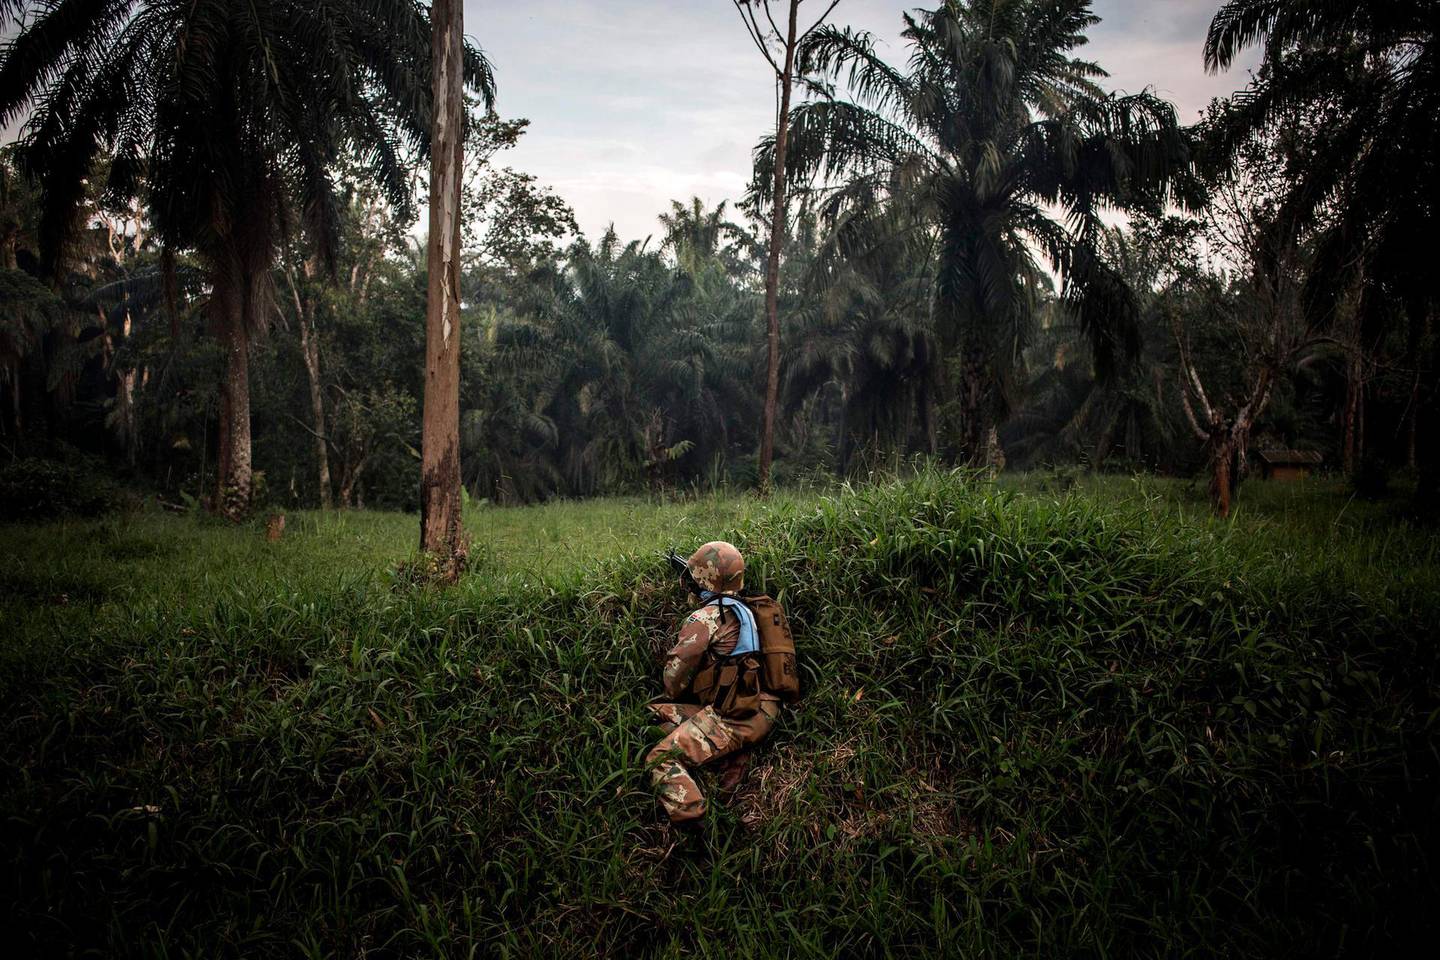 TOPSHOT - A South African soldier from the United Nations Stabilisation Mission in the Democratic Republic of the Congo (MONUSCO) is seen during a patrol to hold off attacks by the Allied Democratic Front (ADF) rebels on October 06, 2018 in Oicha.  The town of Oicha is the site of constant attacks by the ADF rebel group. MONUSCO soldiers are sent to help the Armed Forces of the Democratic republic of the Congo(FARDC) in the fight against ADF. / AFP / JOHN WESSELS
